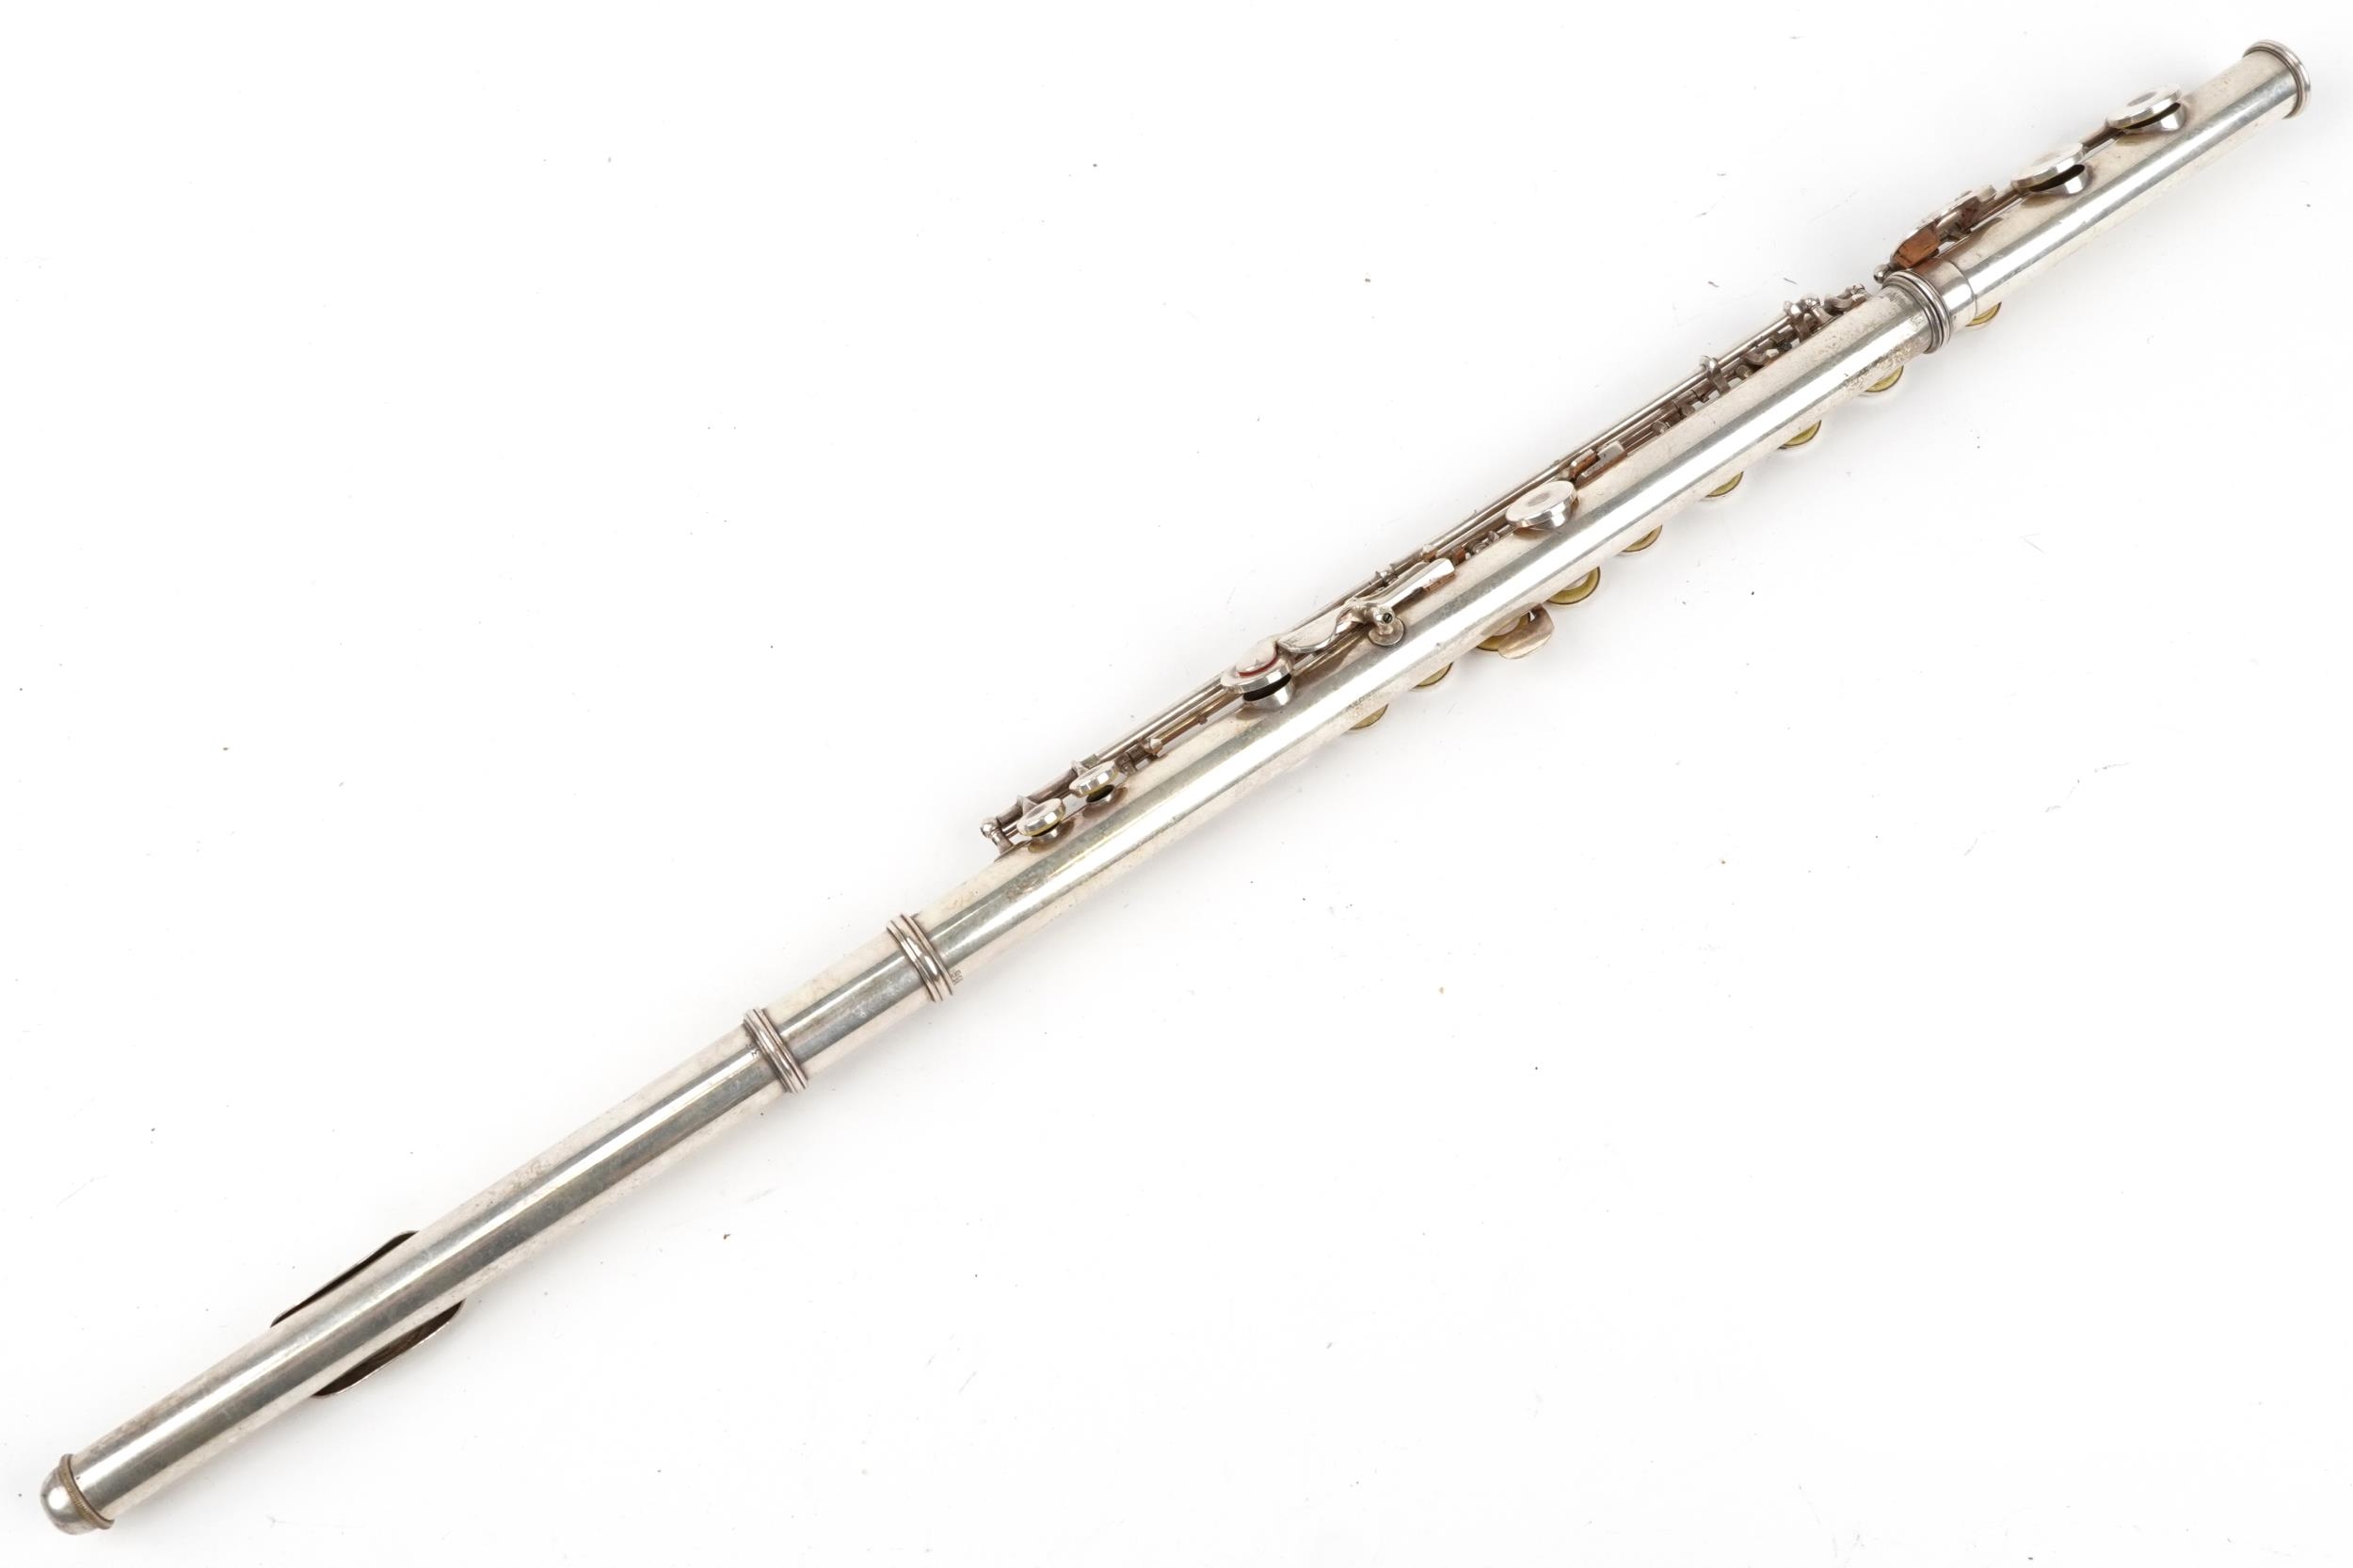 I M Grassi, Italian silver plated three piece flute housed in a fitted case, numbered 5136 - Image 3 of 3